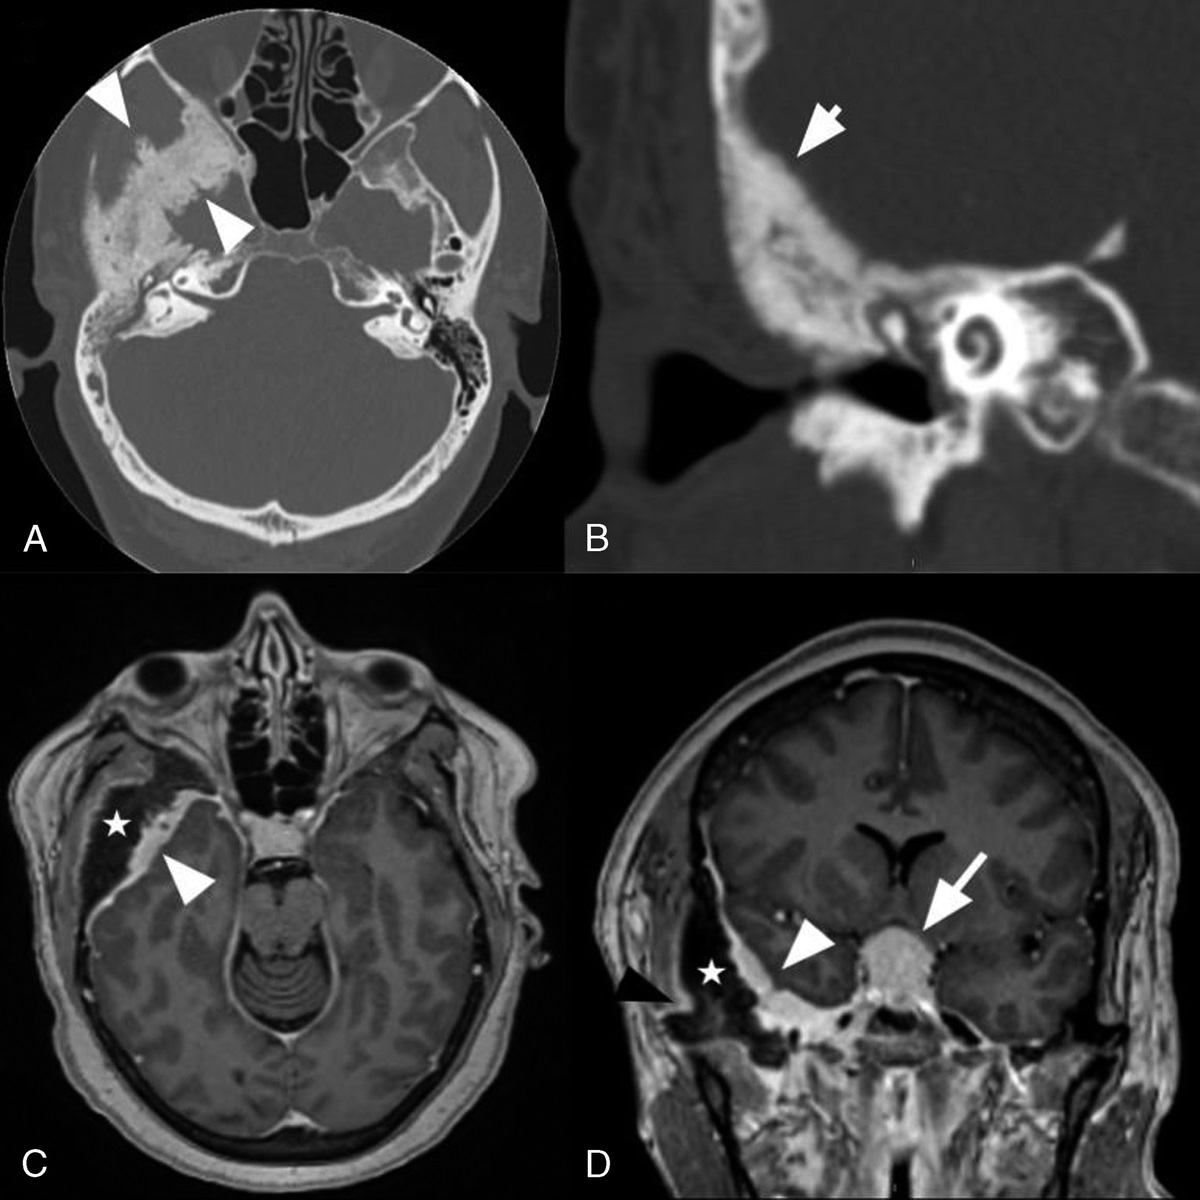 Intraosseous Meningioma Mimicking Fibrous Dysplasia: Imaging Case of the Month